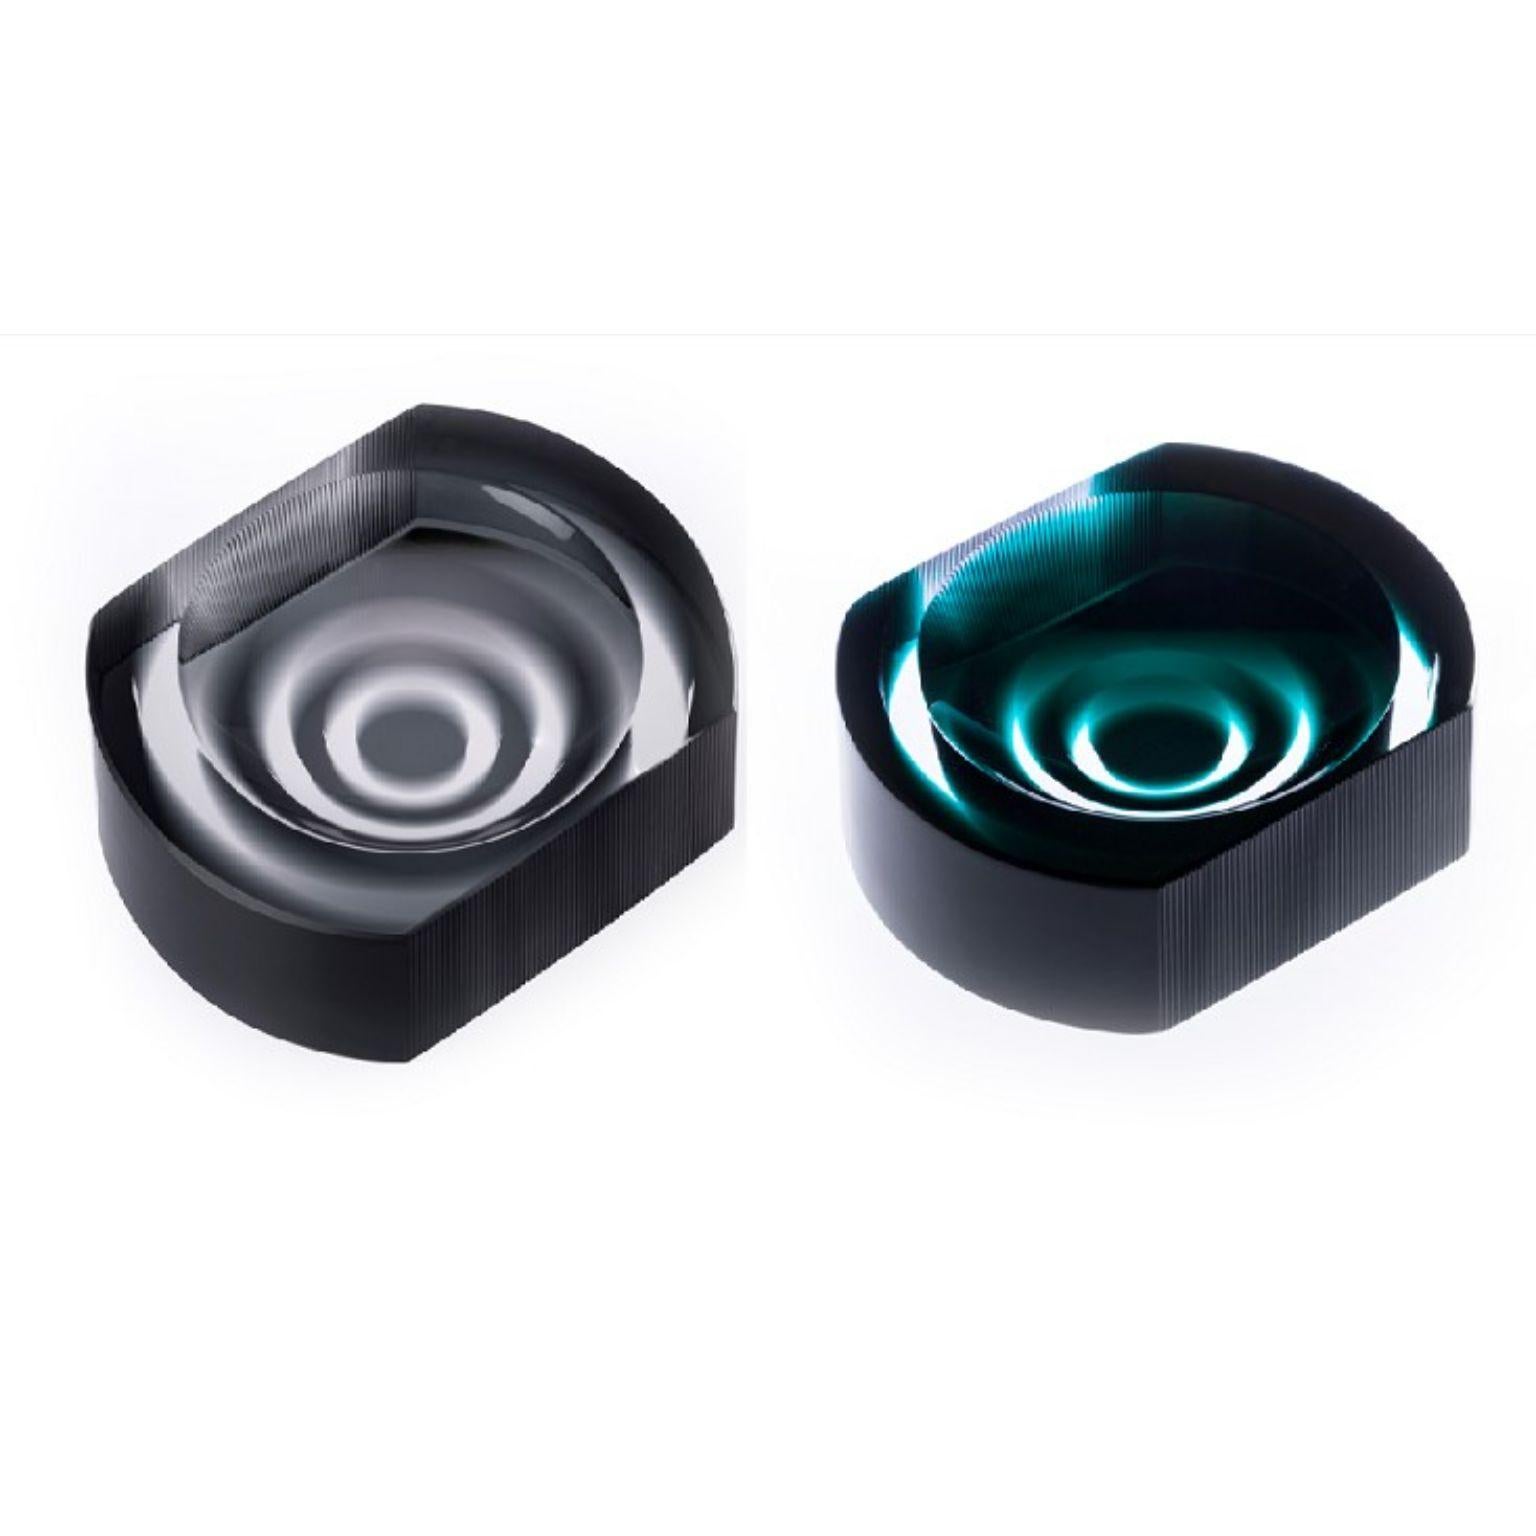 Set of 2 Incisioni Iridi Cut Ashtrays by Purho
Dimensions: D14x H3.5 cm
Materials: Glass
Other colours and dimensions are available.

Purho is a new protagonist of made in Italy design , a work of synthesis, a research that has lasted for